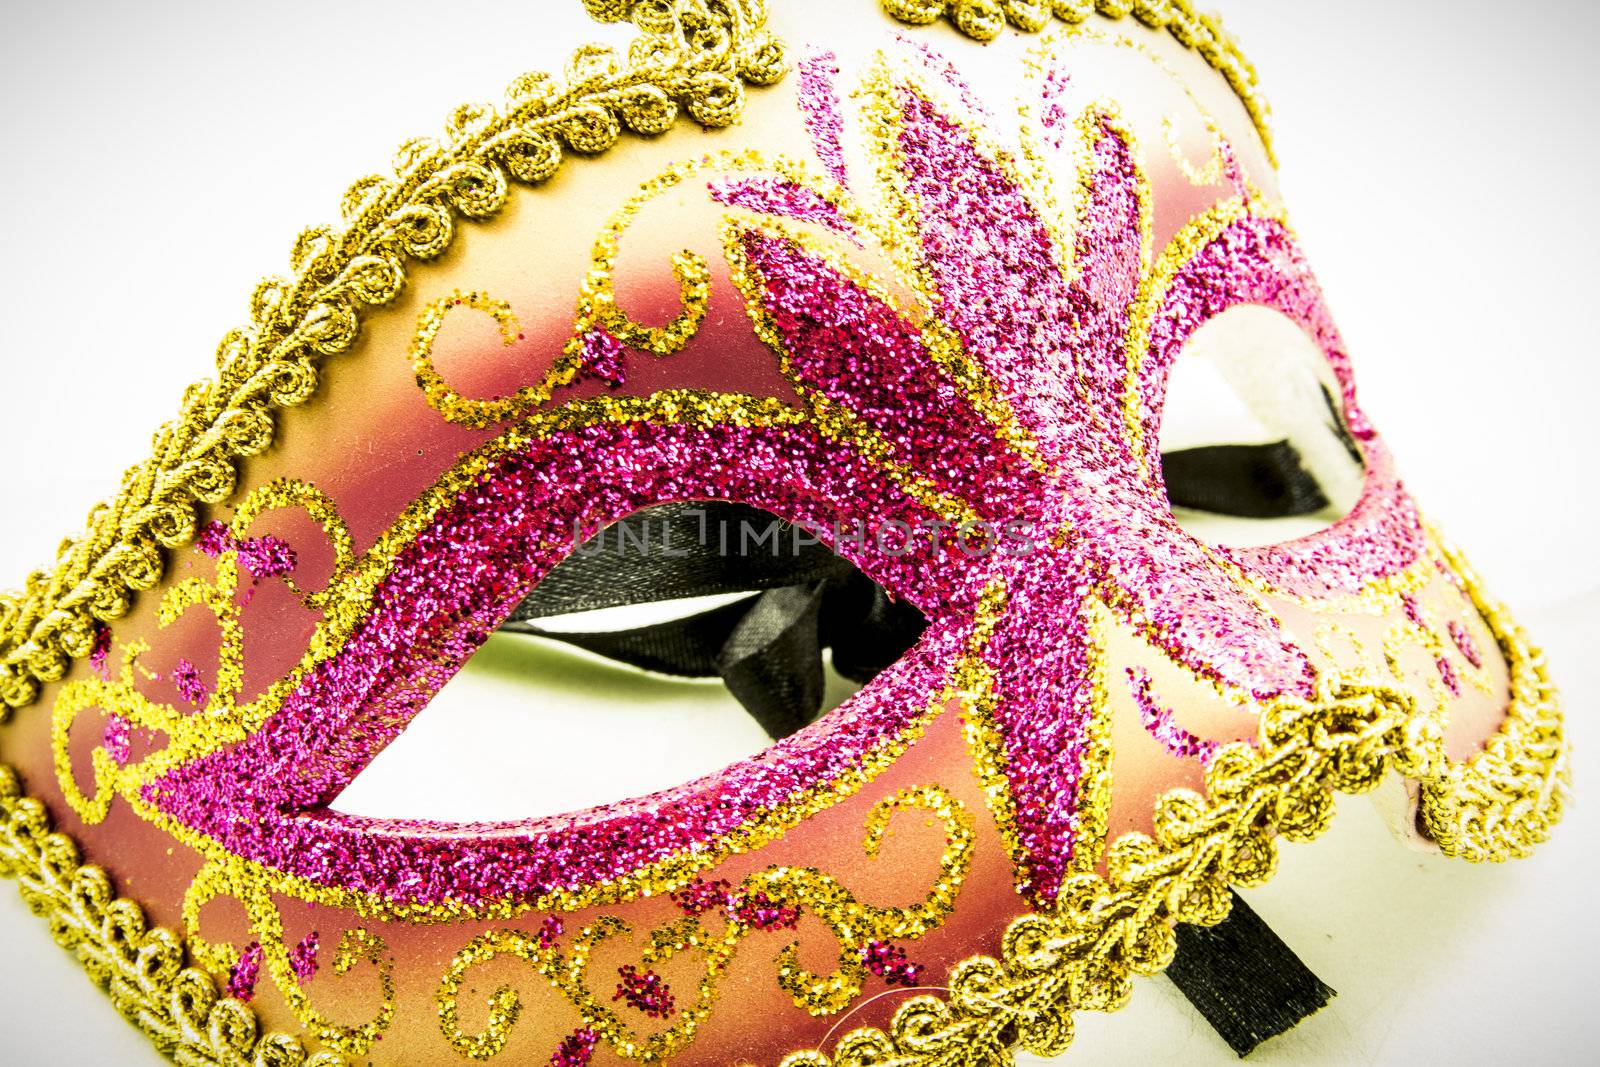 The Carnival in Venice was first recorded in 1268, the main part of this carnival is wearing masks like in the picture